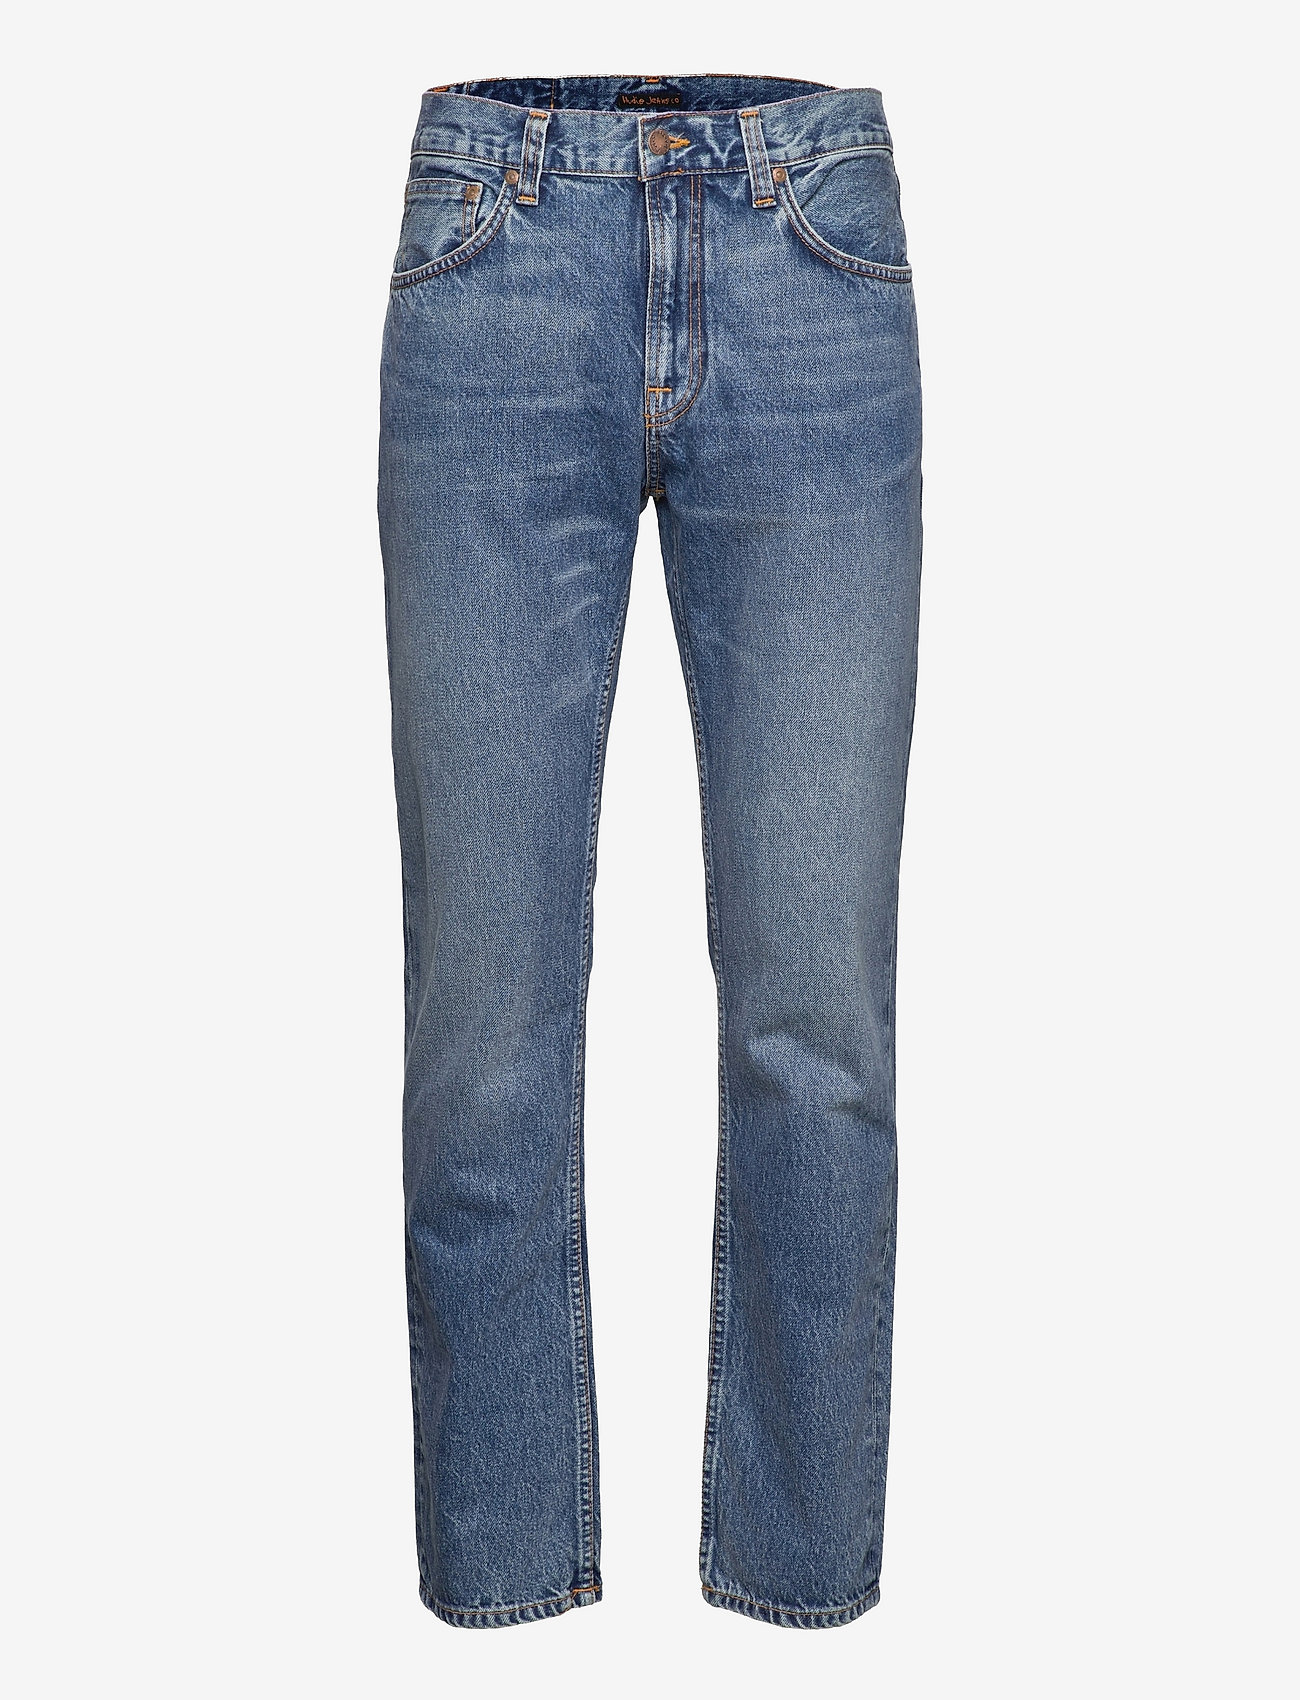 Nudie Jeans - Gritty Jackson - regular jeans - far out - 1